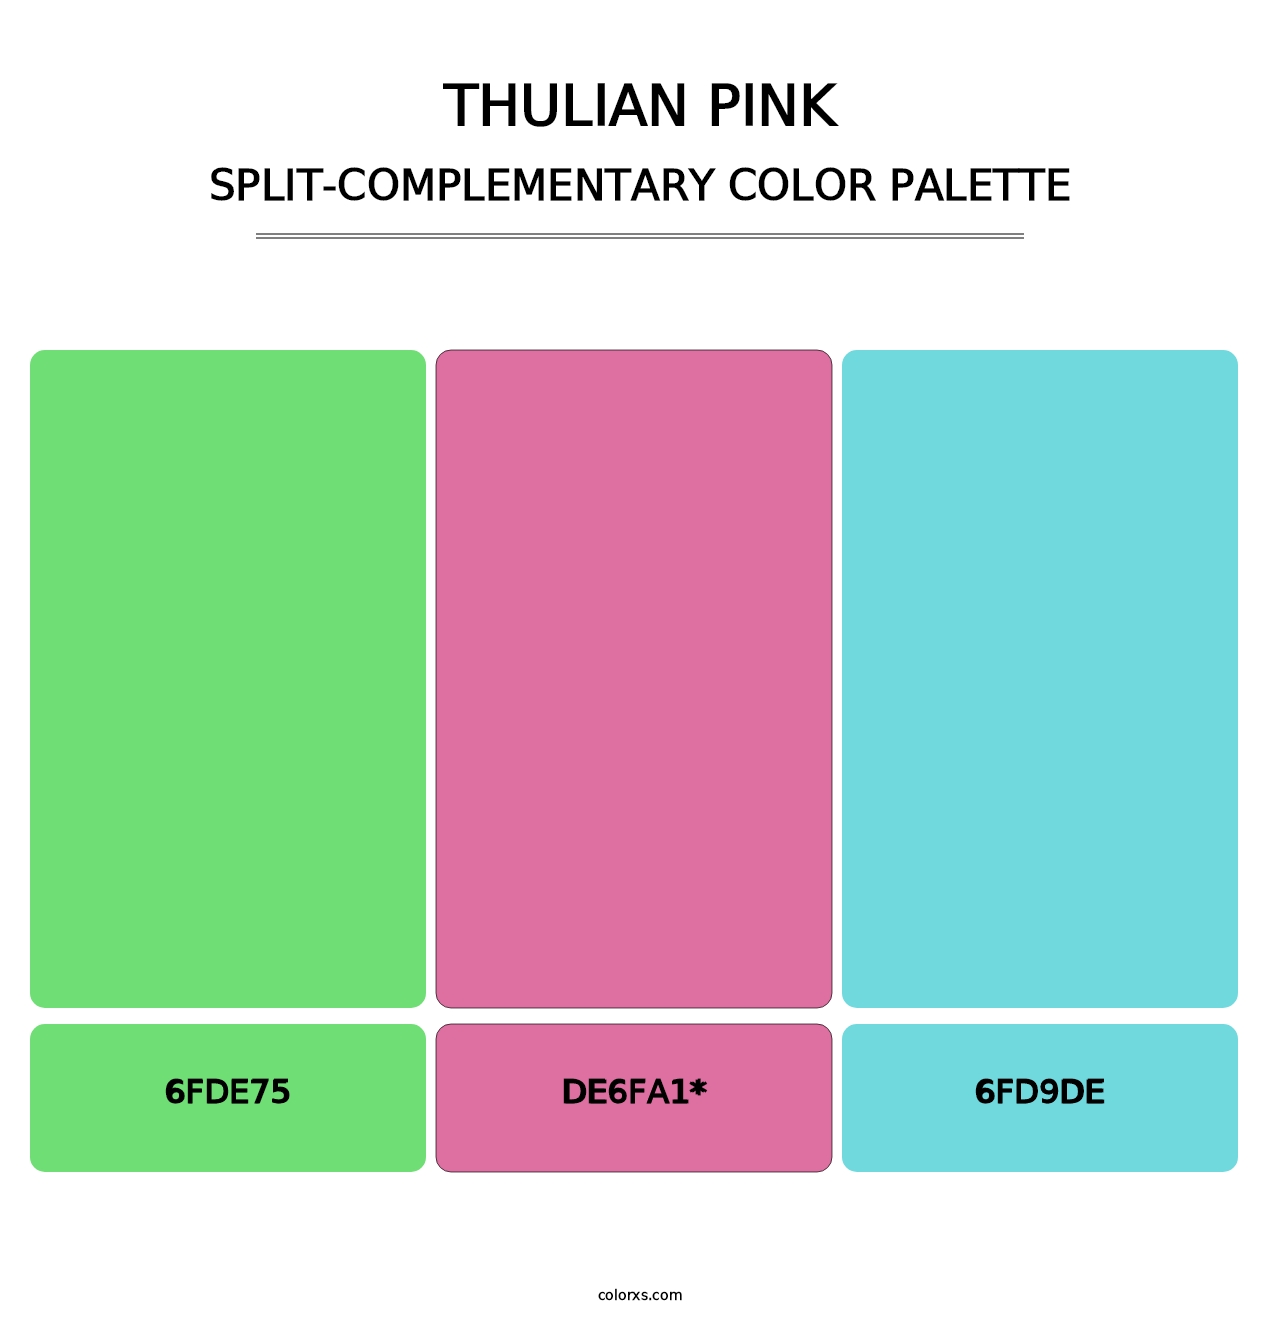 Thulian Pink - Split-Complementary Color Palette